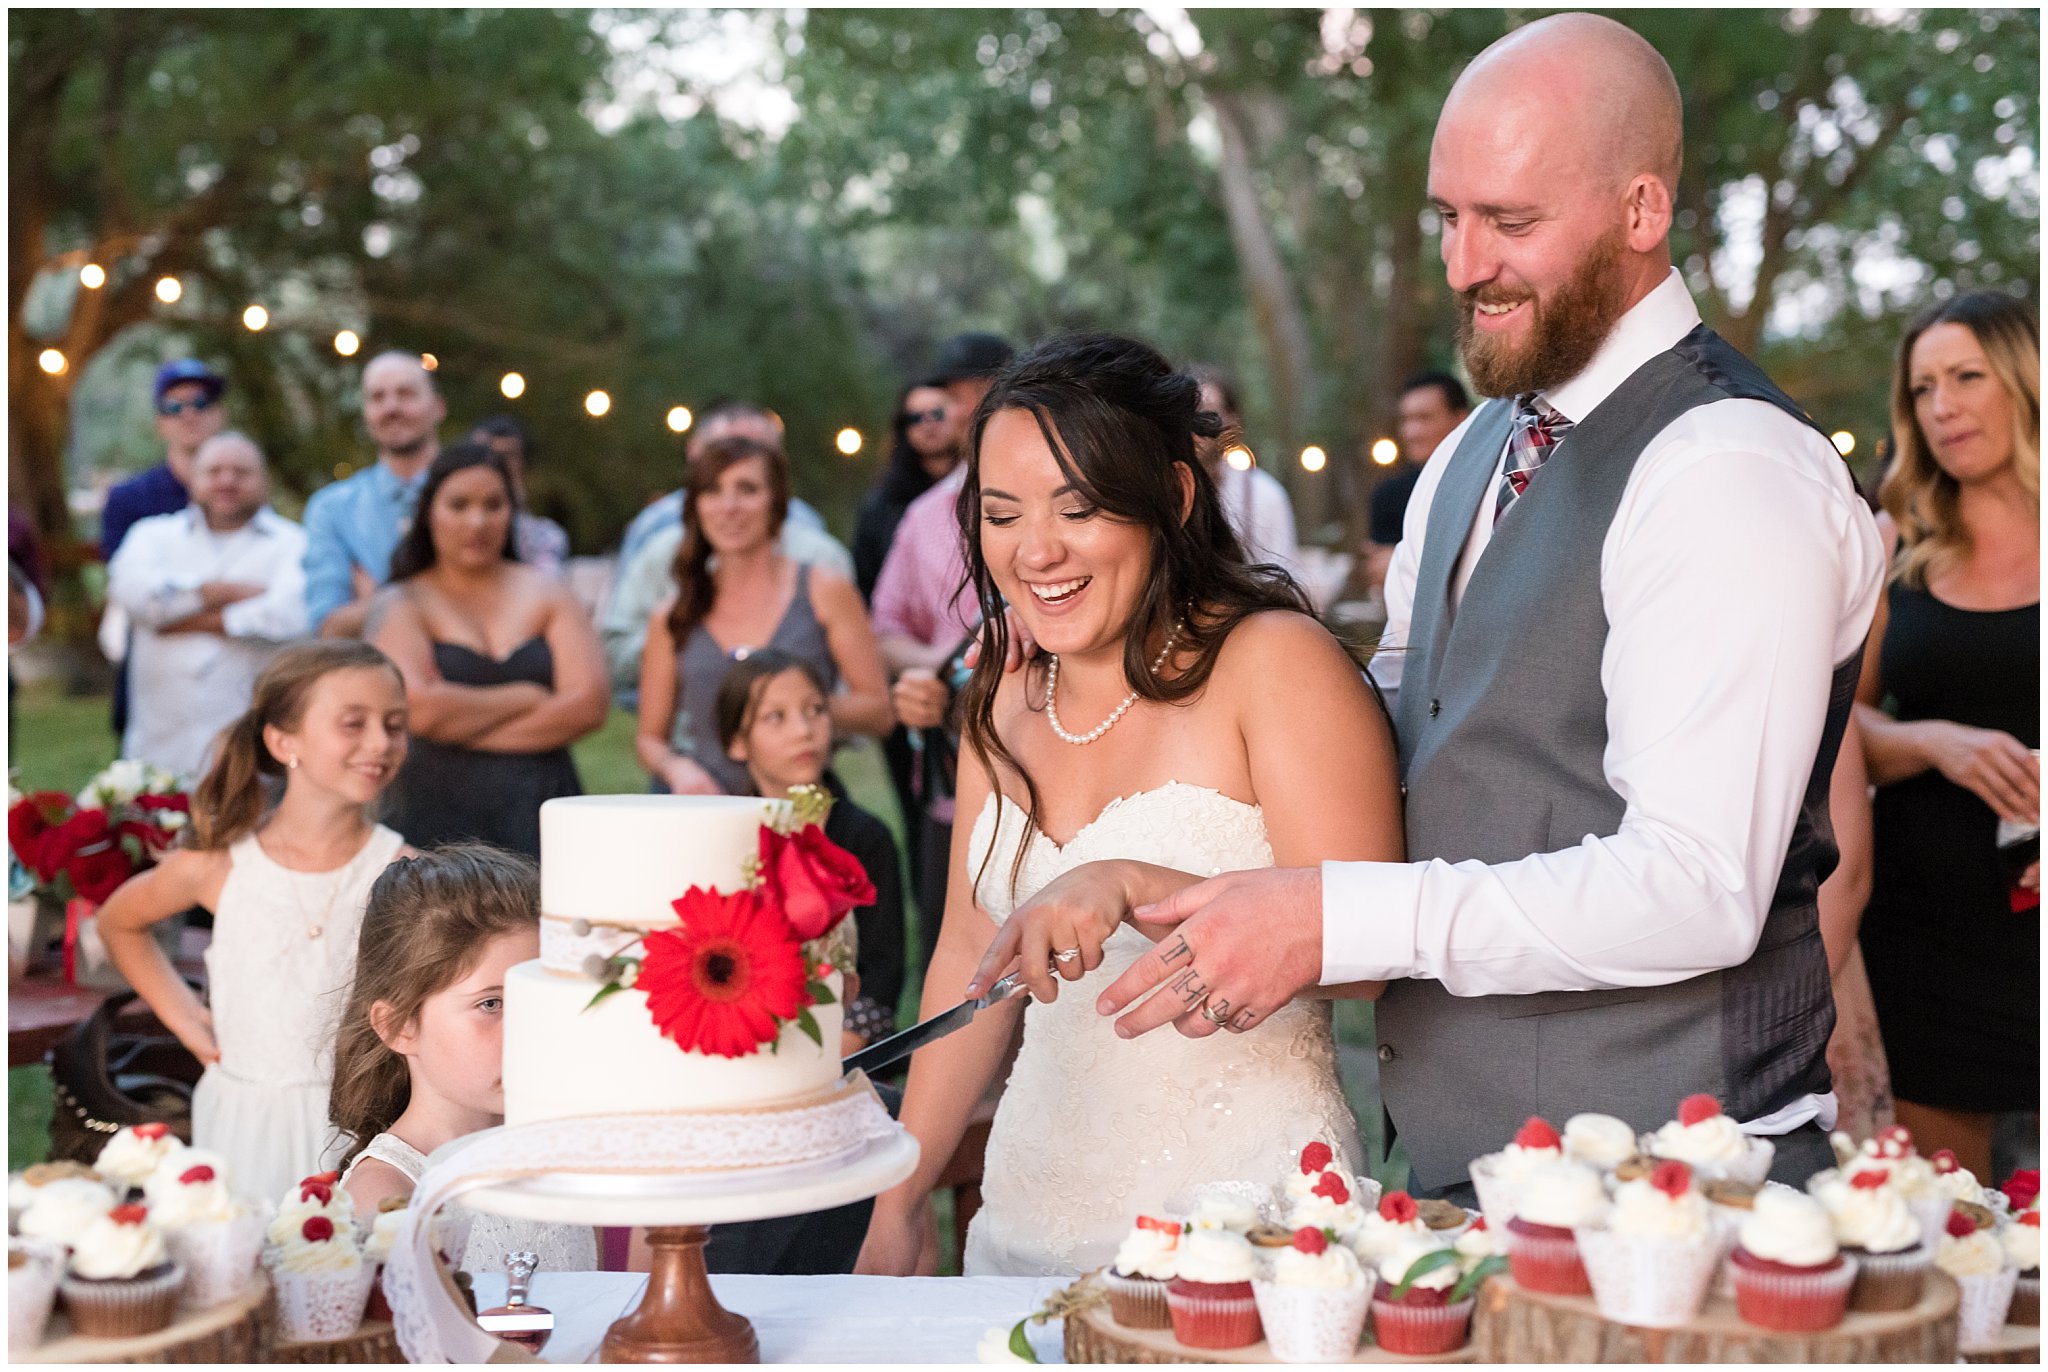 Bride and groom laughing while cutting the cake | Red and Grey wedding | Davis County Outdoor Wedding | Jessie and Dallin Photography